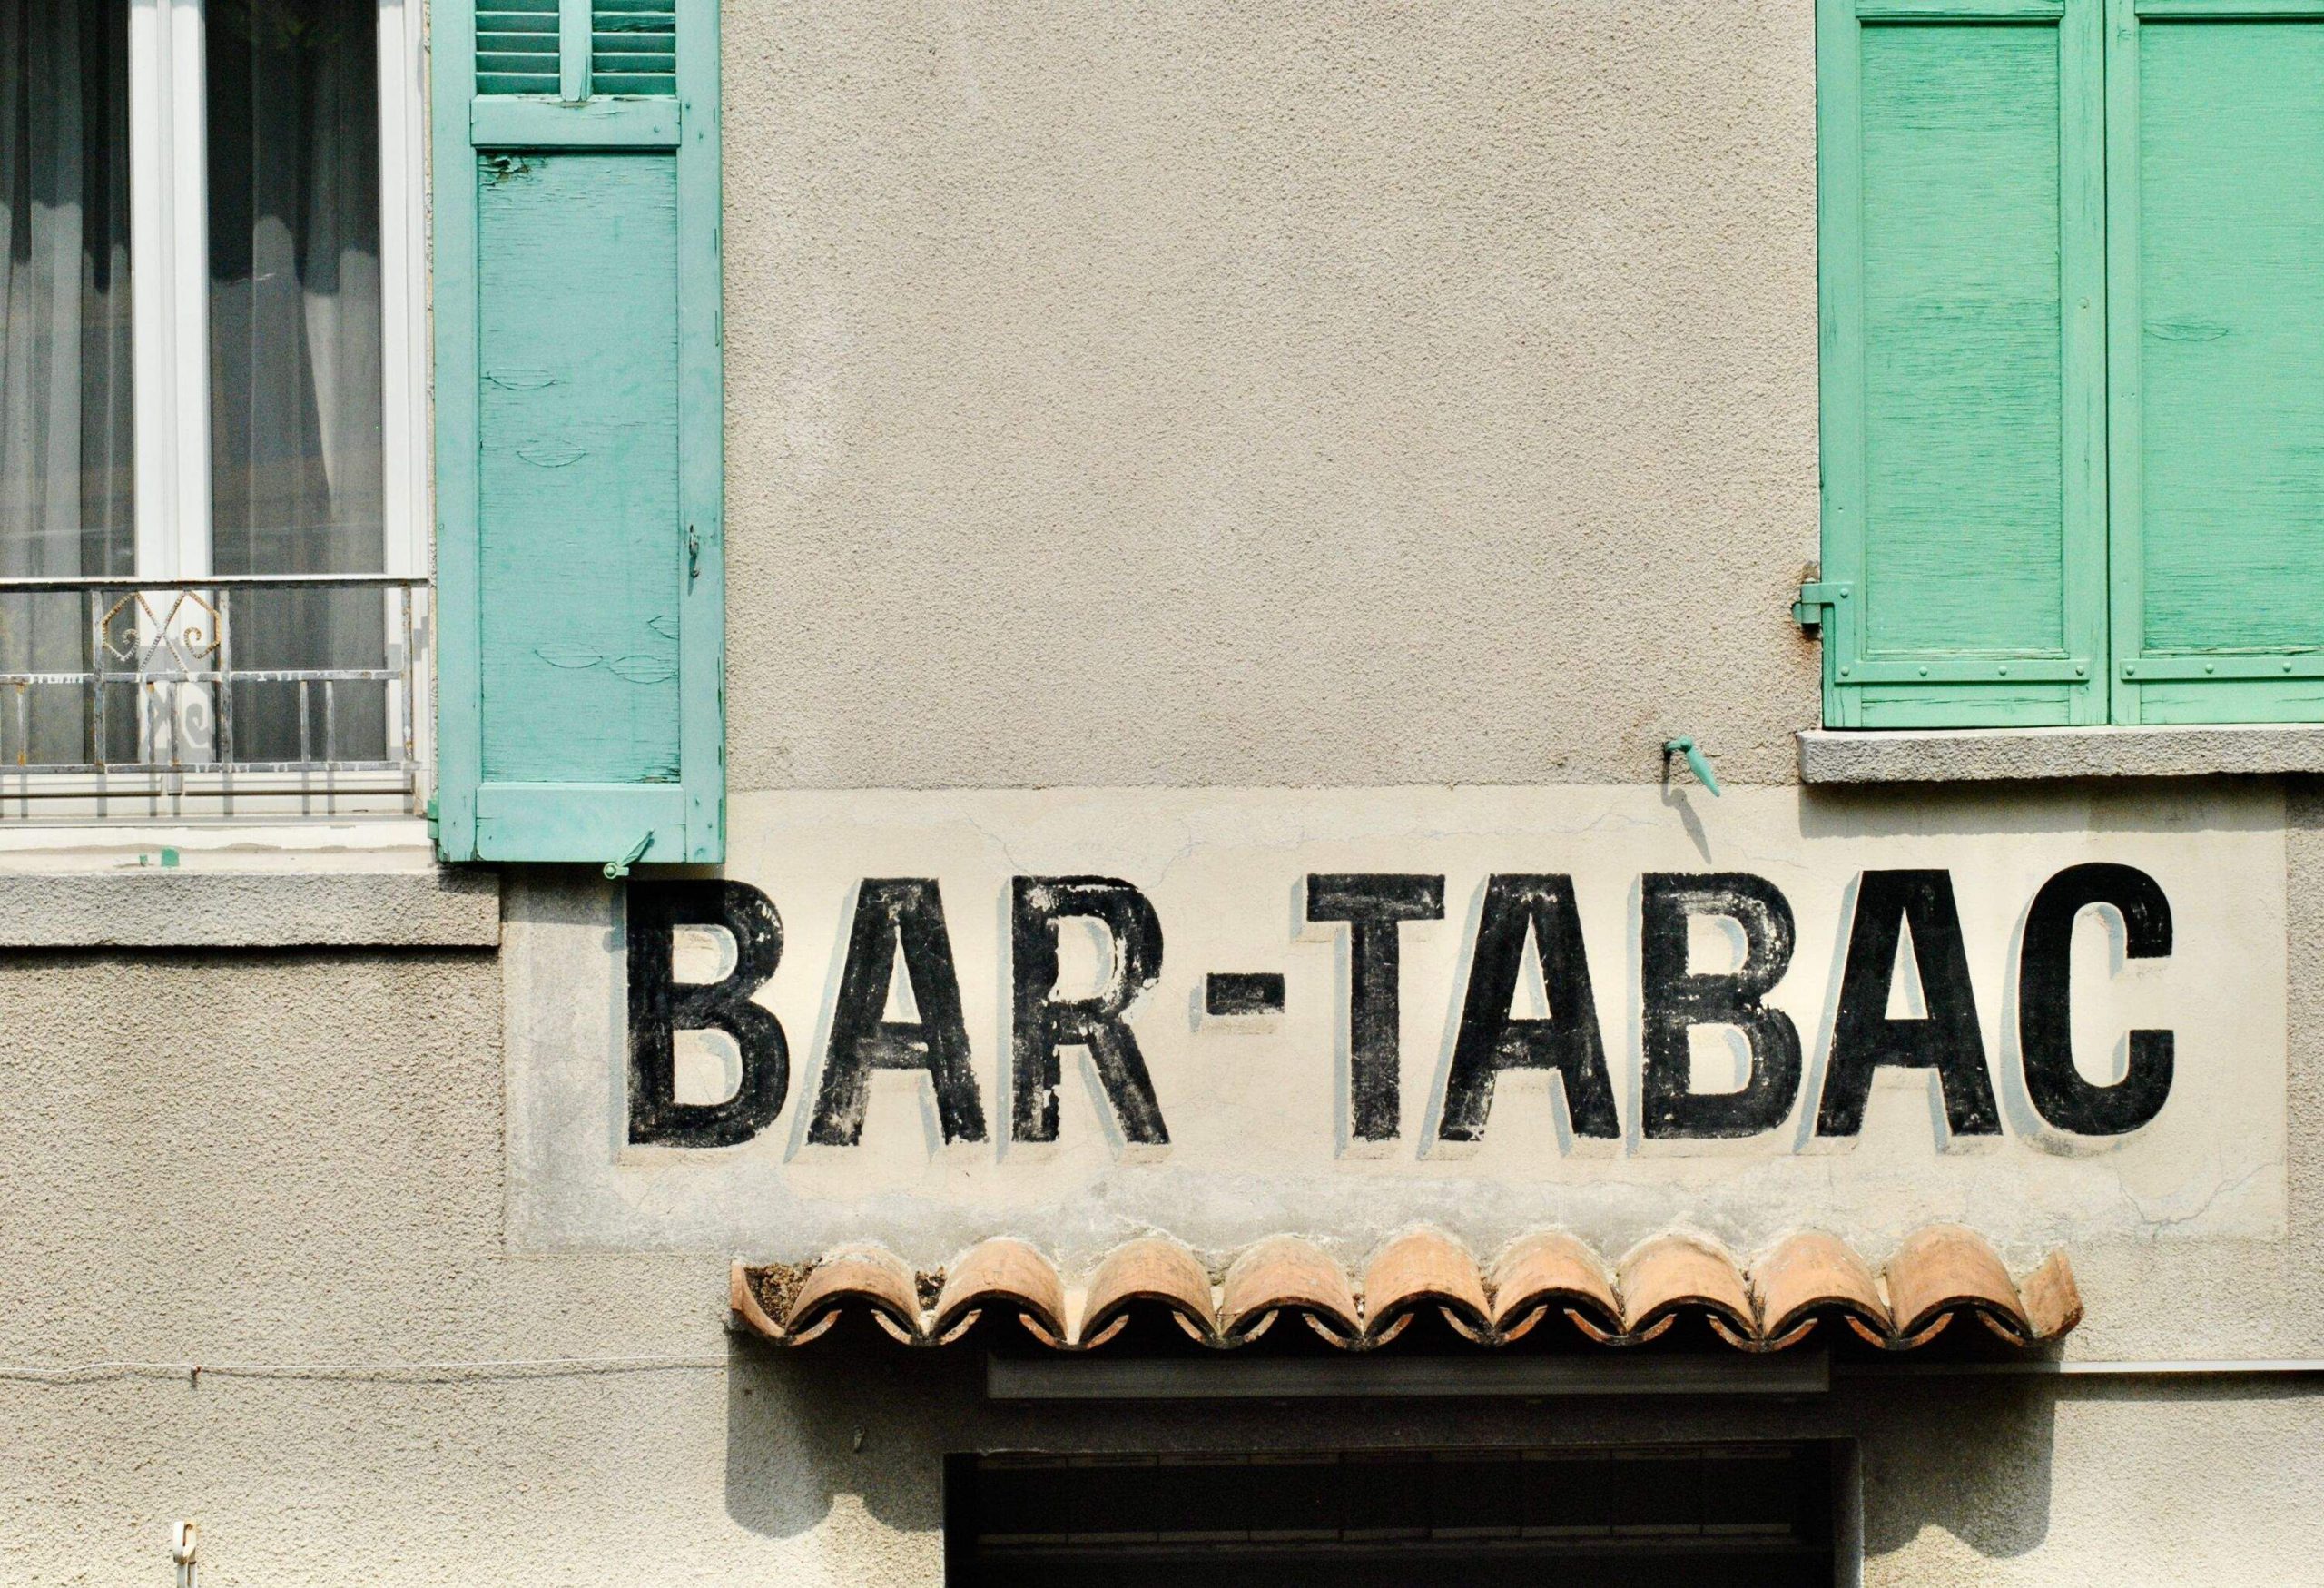 A close-up of the cafe sign with surrounding details of window, shutters and doorway.